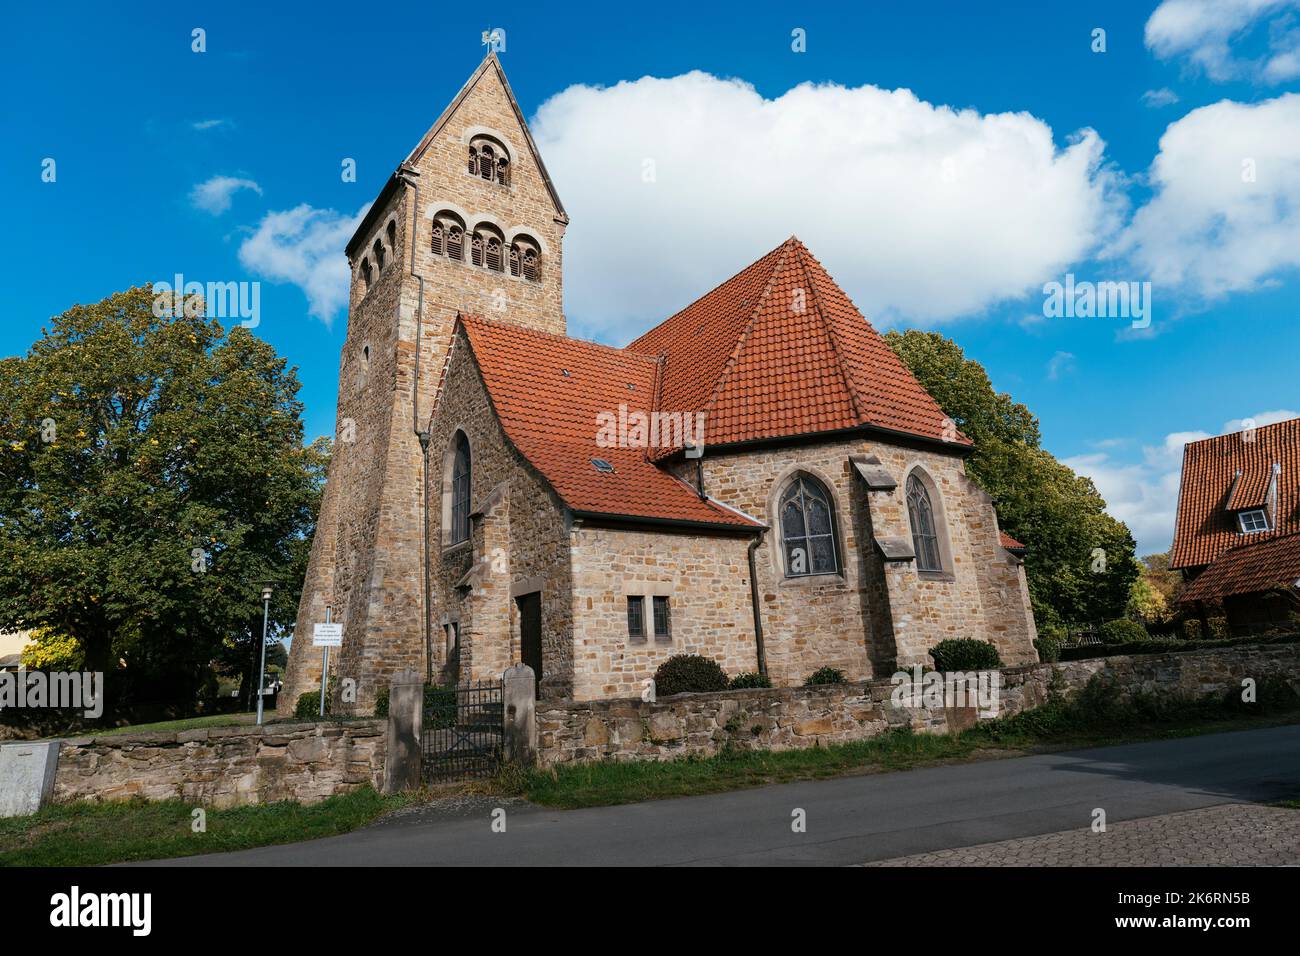 Saints Peter and Paul church in Veltheim Stock Photo